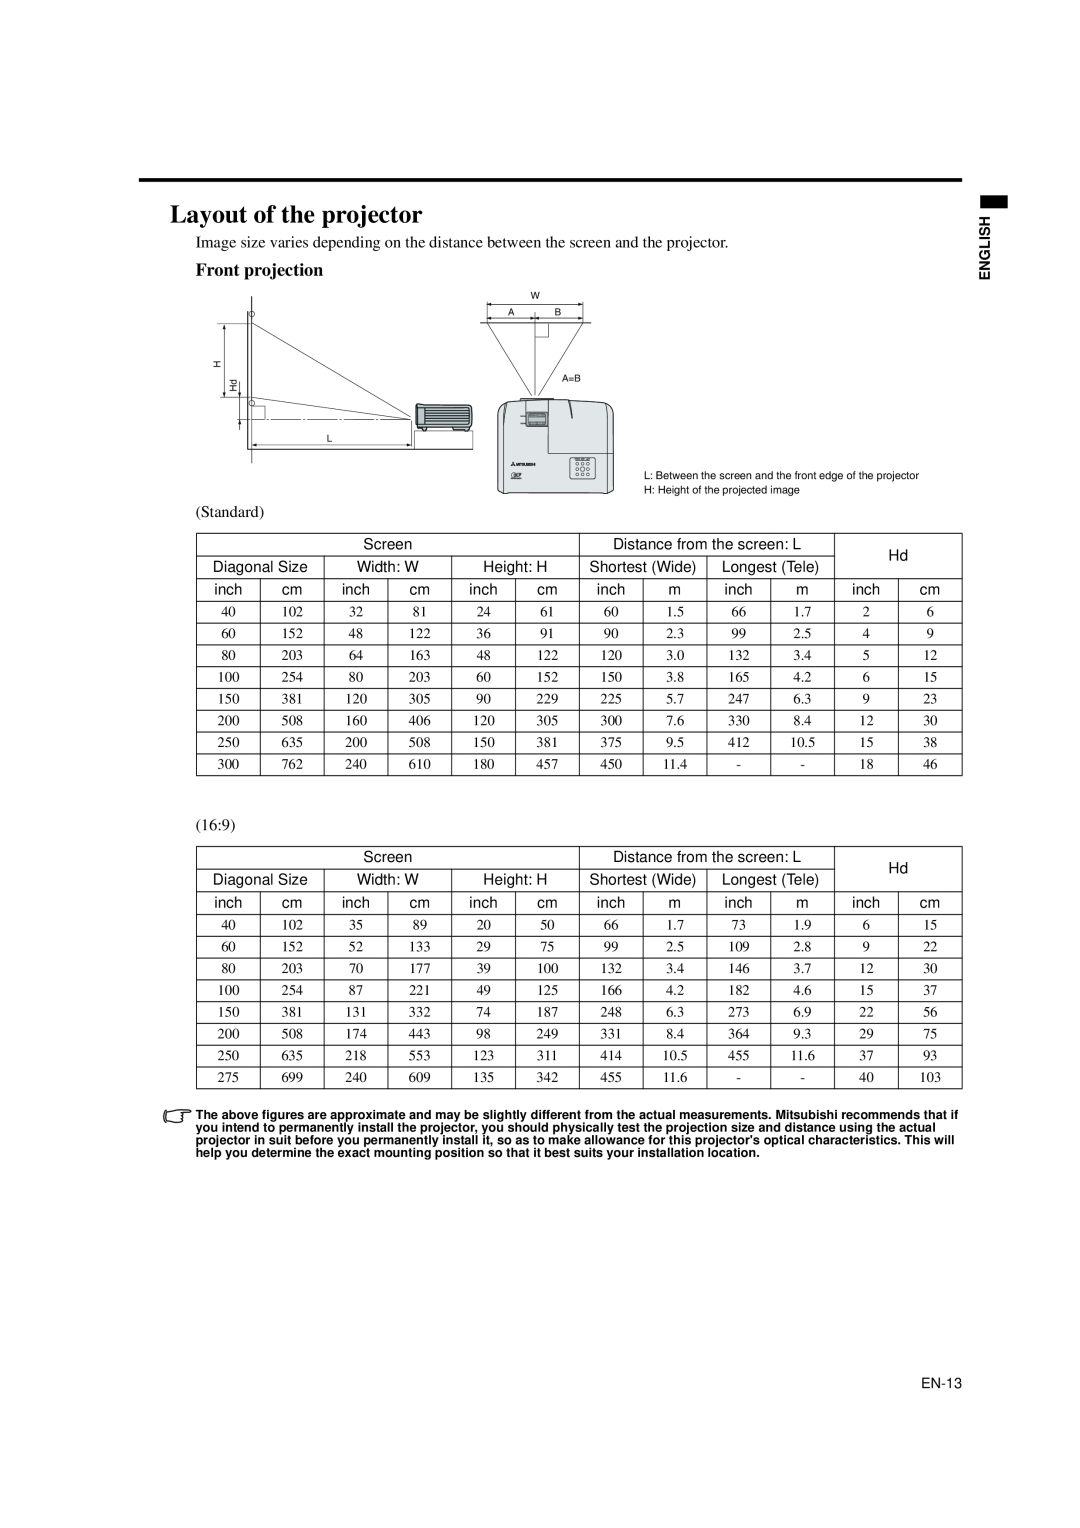 Mitsubishi Electronics ES200U, EX200U user manual Layout of the projector, Front projection 